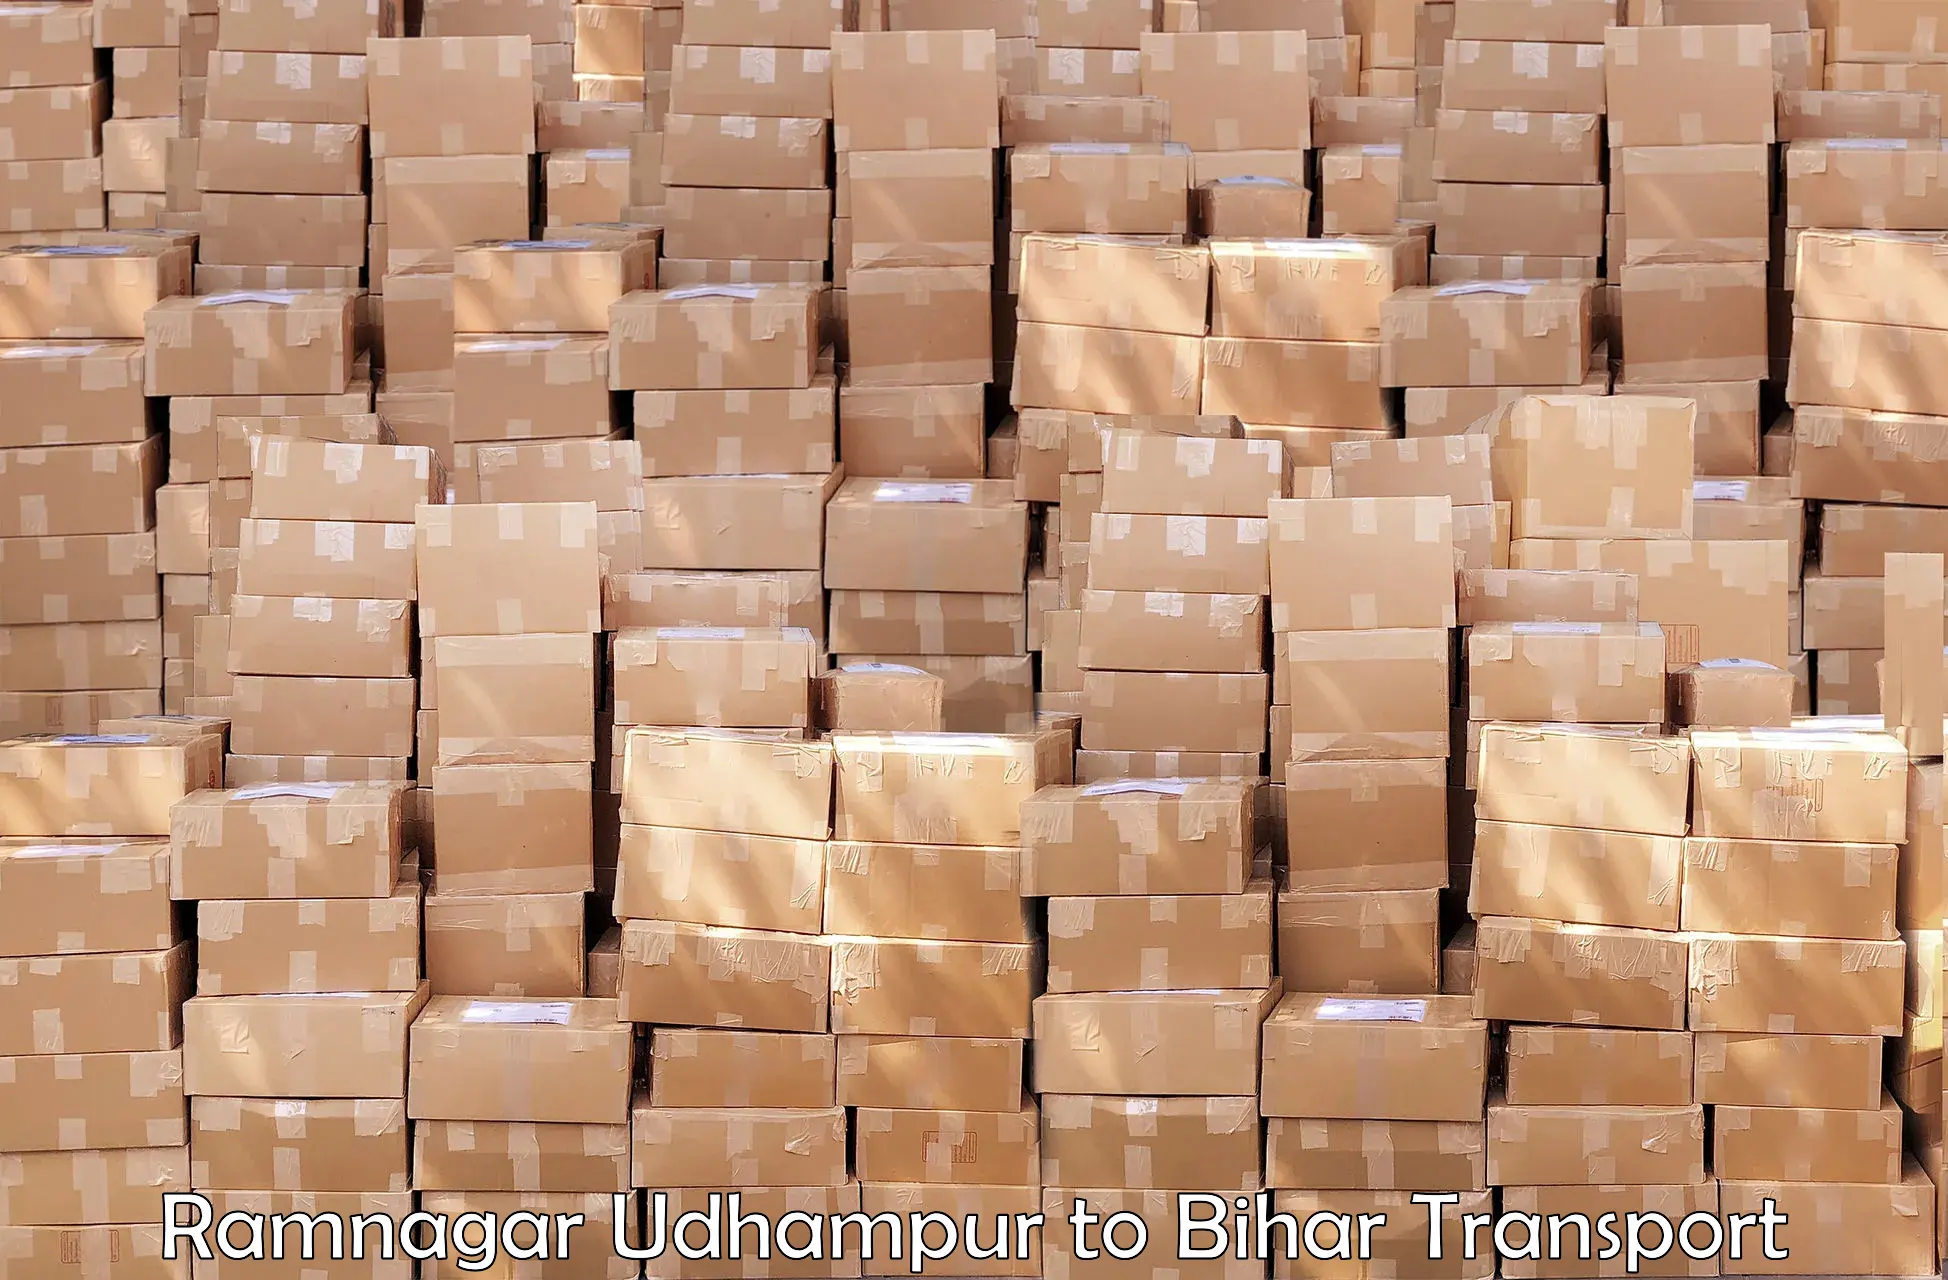 Truck transport companies in India Ramnagar Udhampur to Mohammadpur